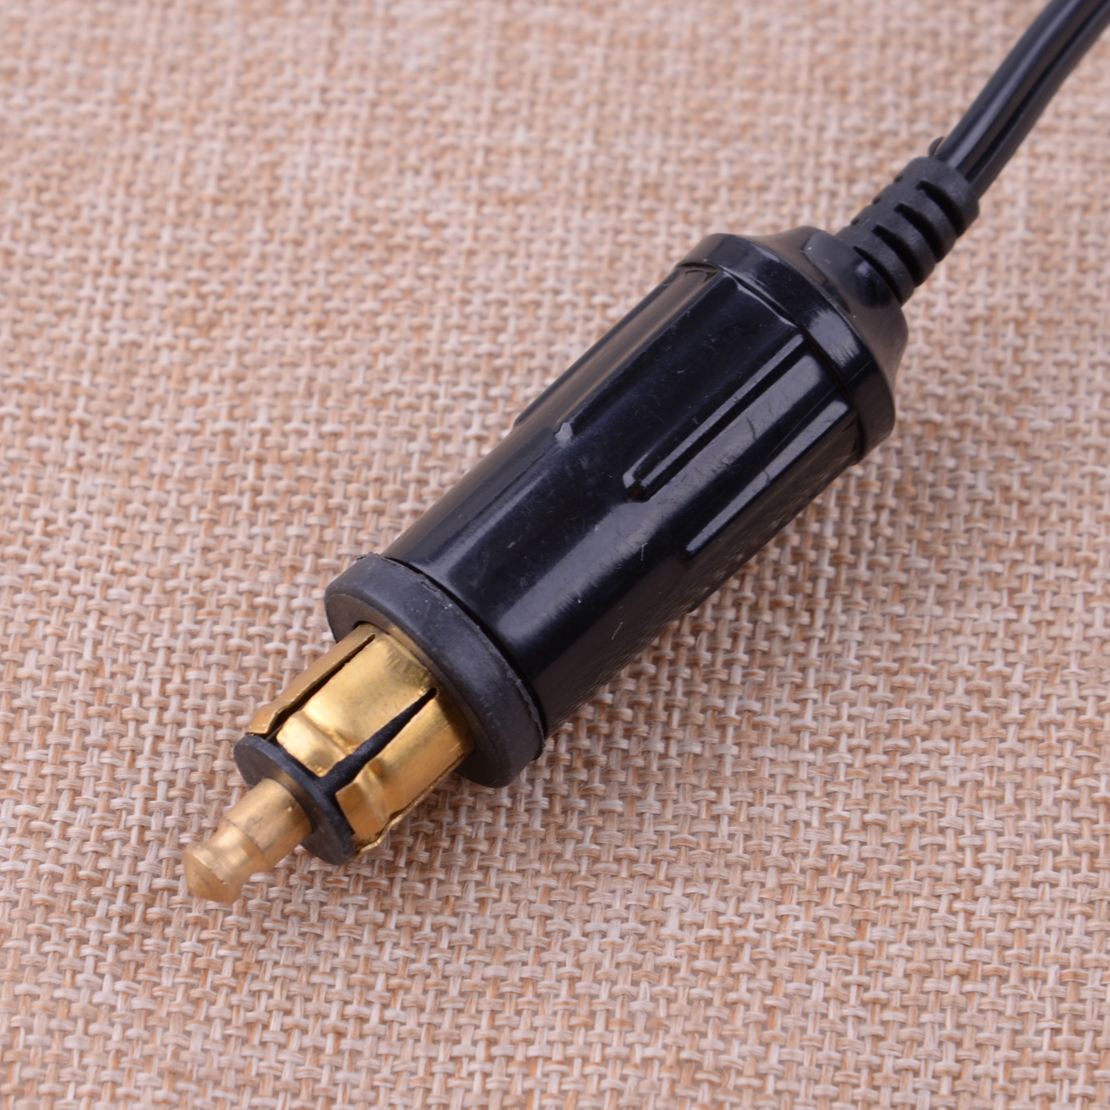 DIN Hella Powerlet Plug to SAE Adapter Connector Cable Fit For BMW